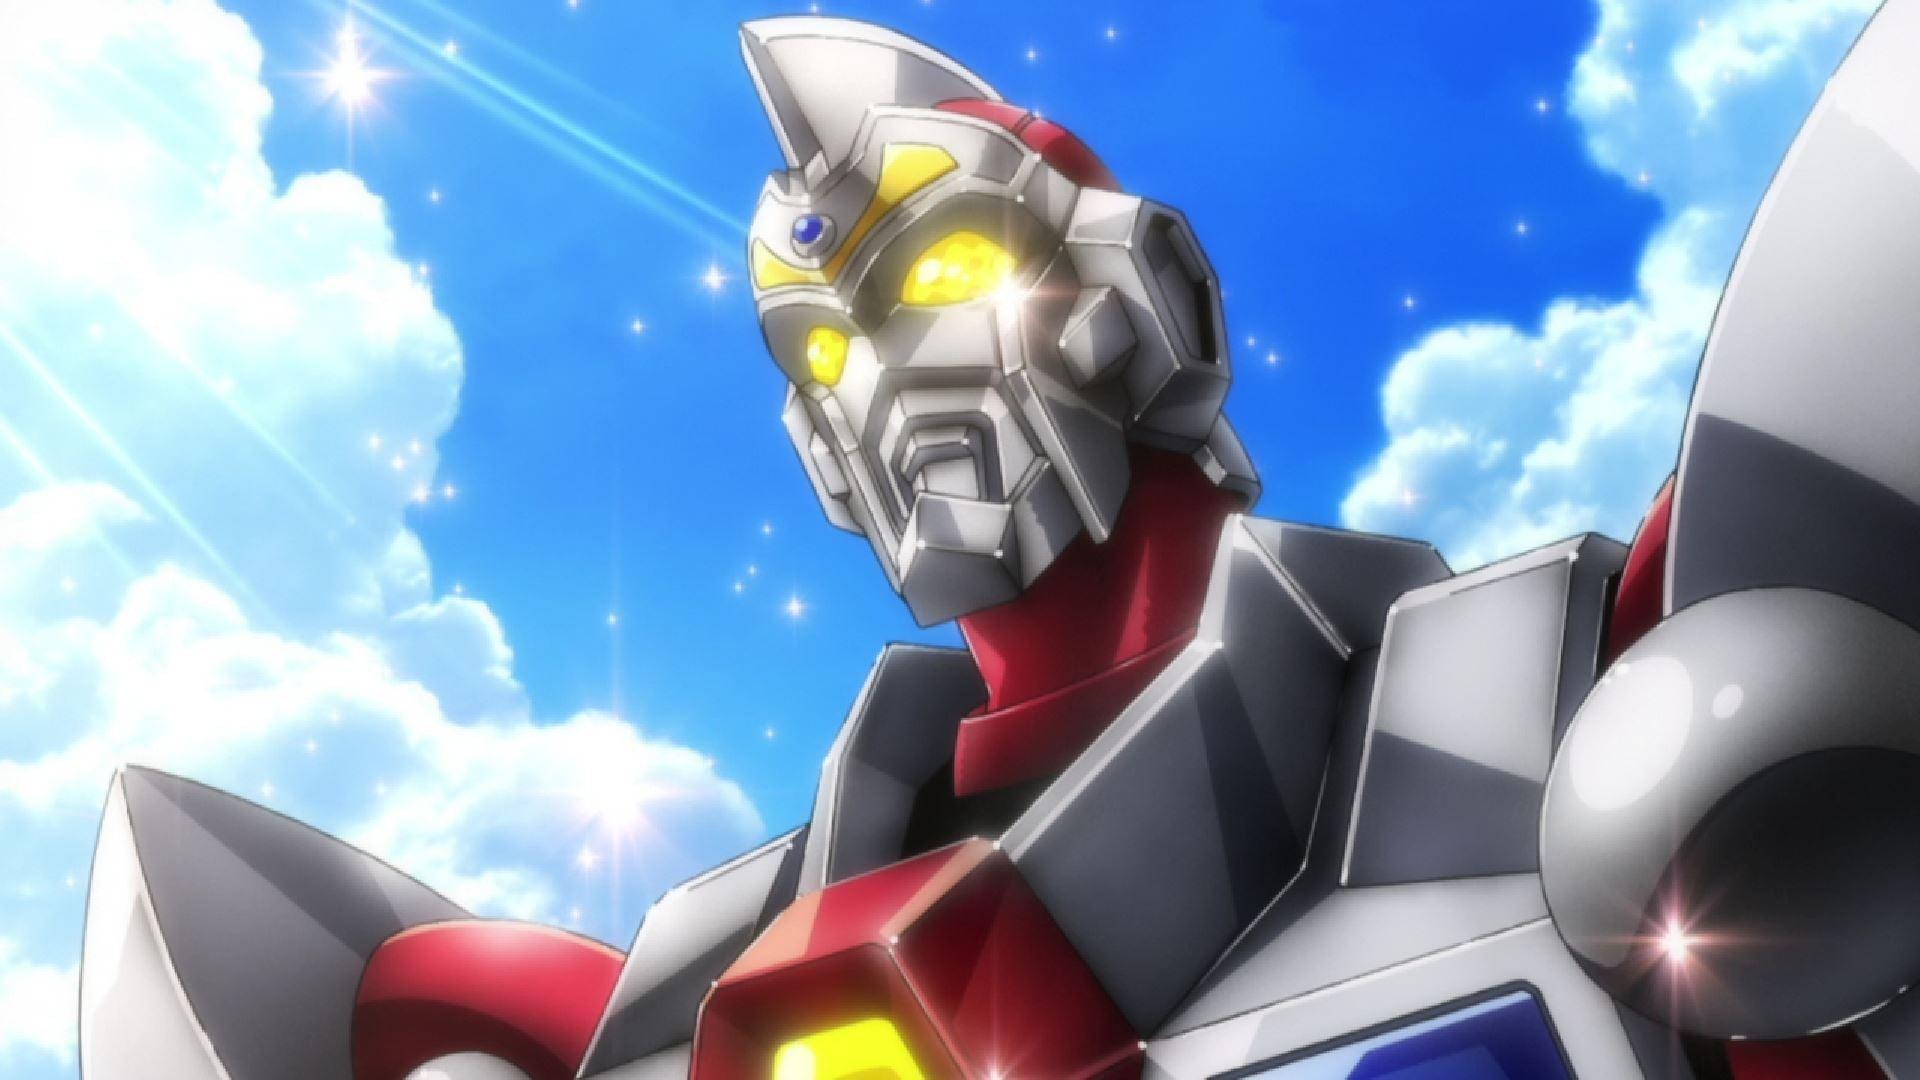 A new trailer, key visual, and more revealed for the upcoming 'Gridman  Universe' anime movie